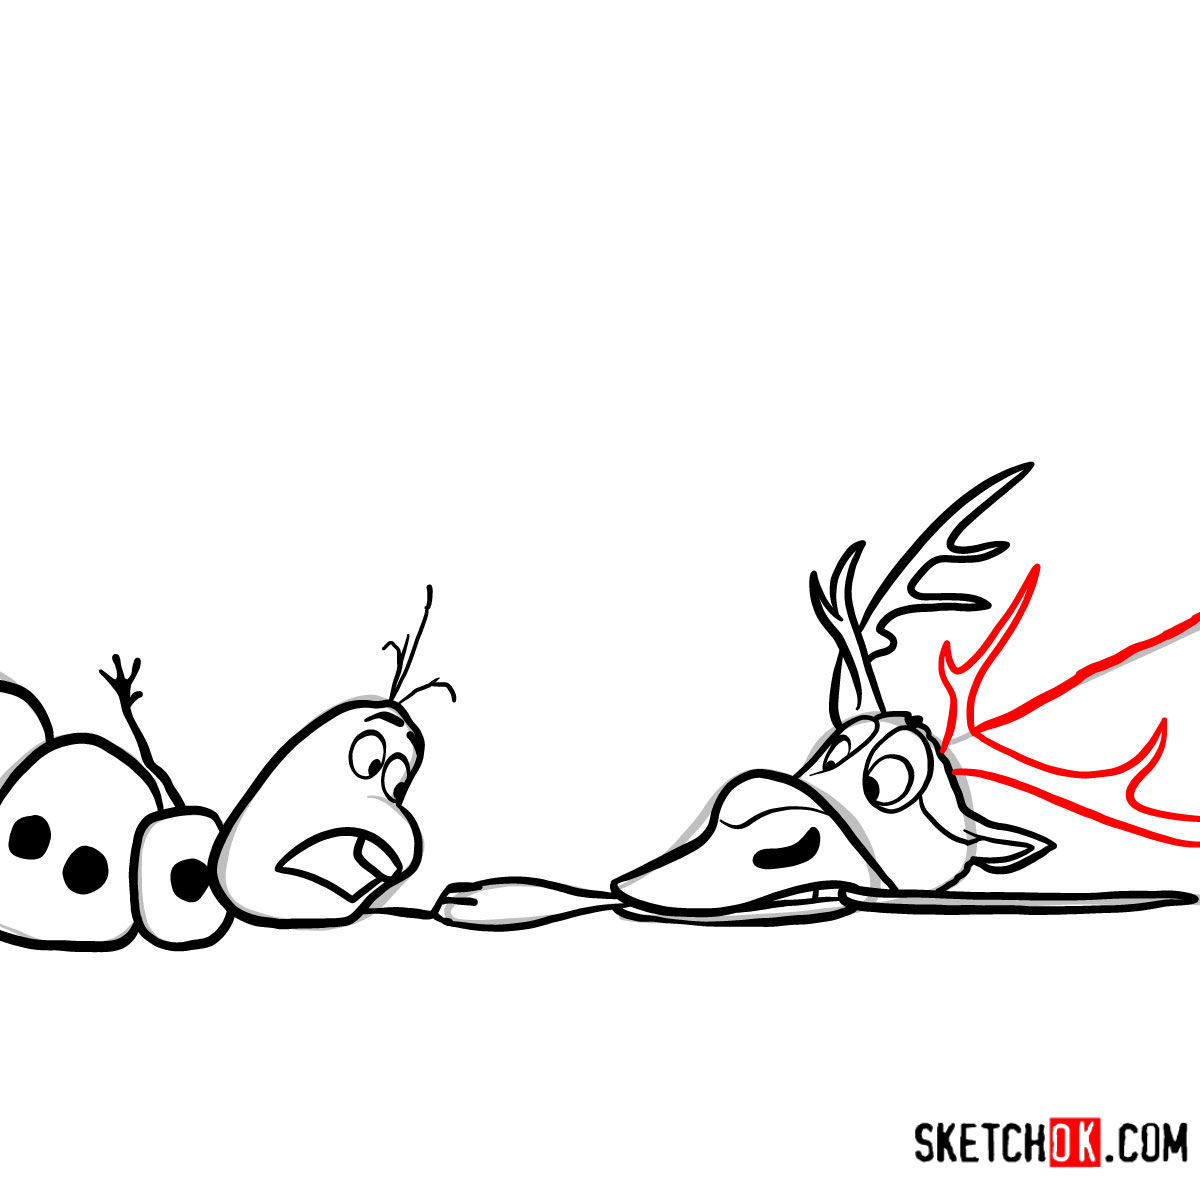 How to draw Sven trying to bite Olaf's carrot nose - step 12